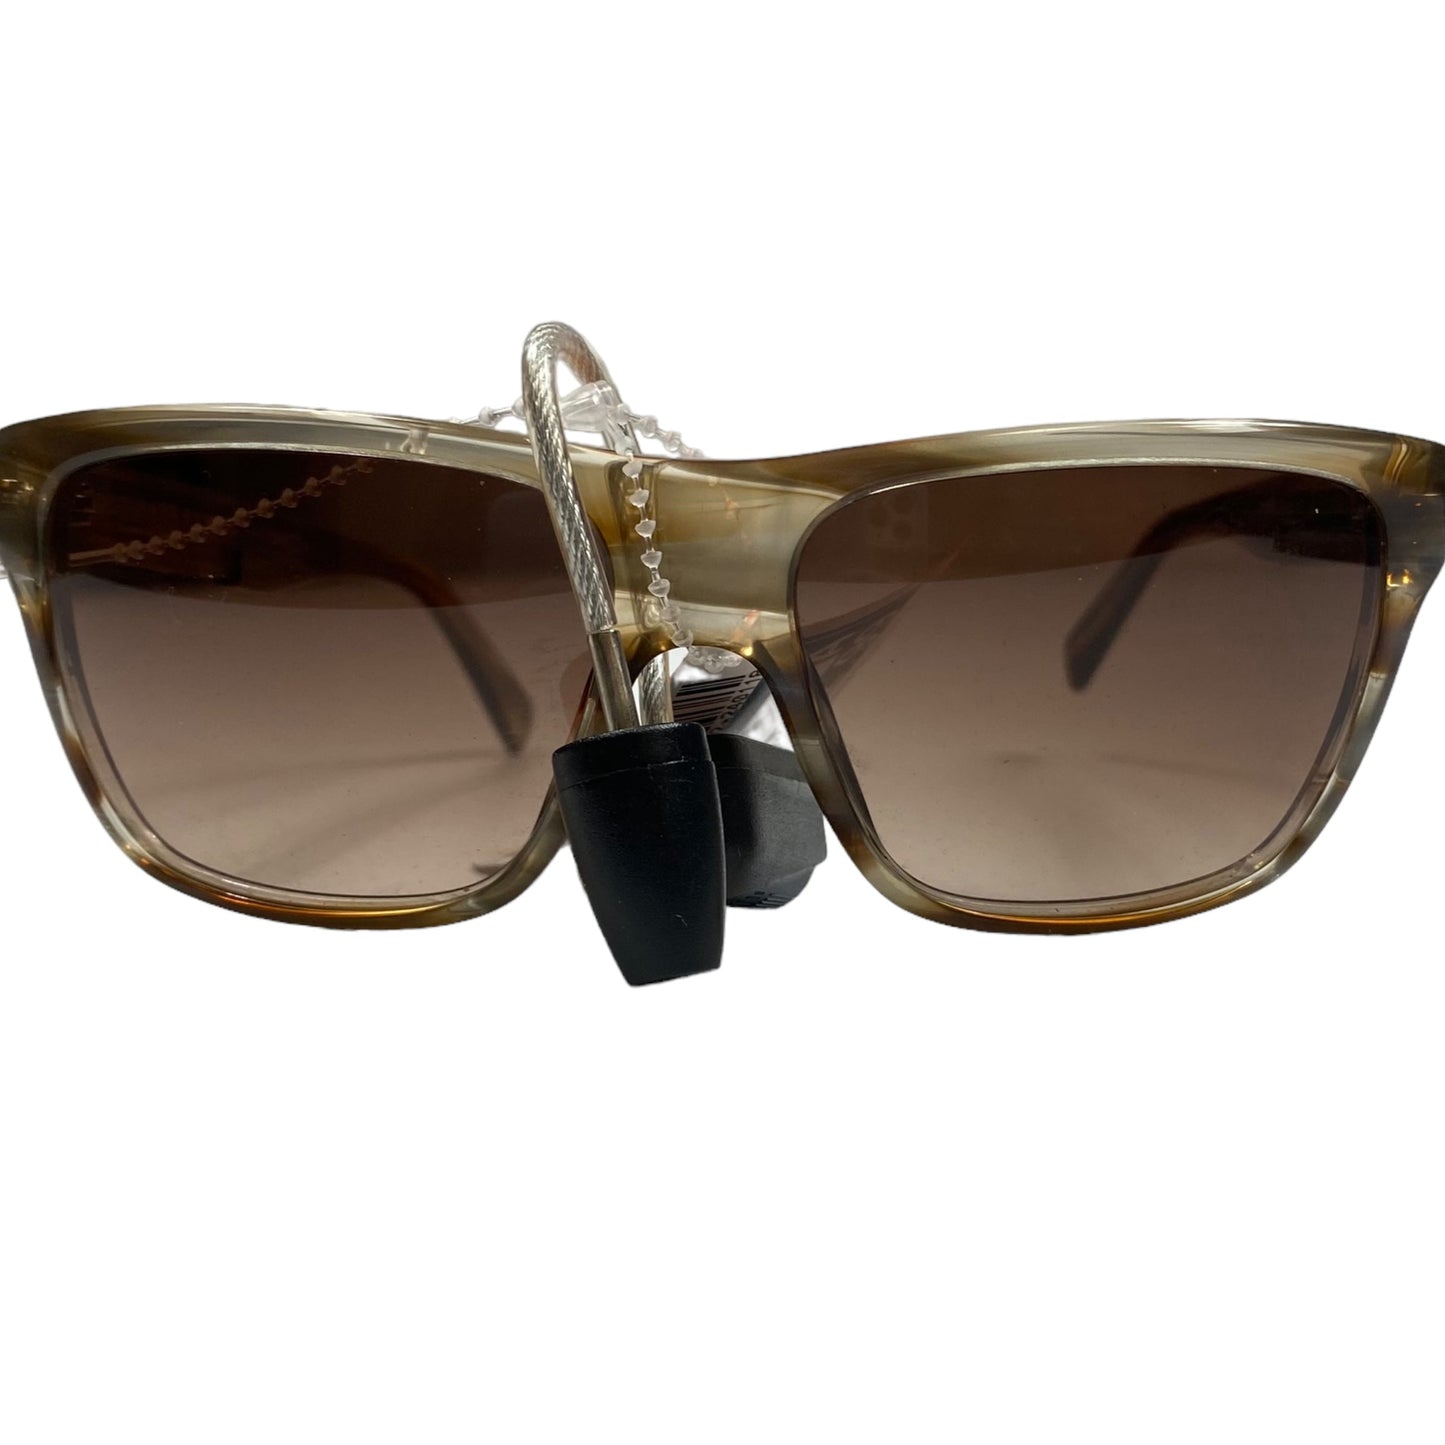 Sunglasses Designer By Marc By Marc Jacobs